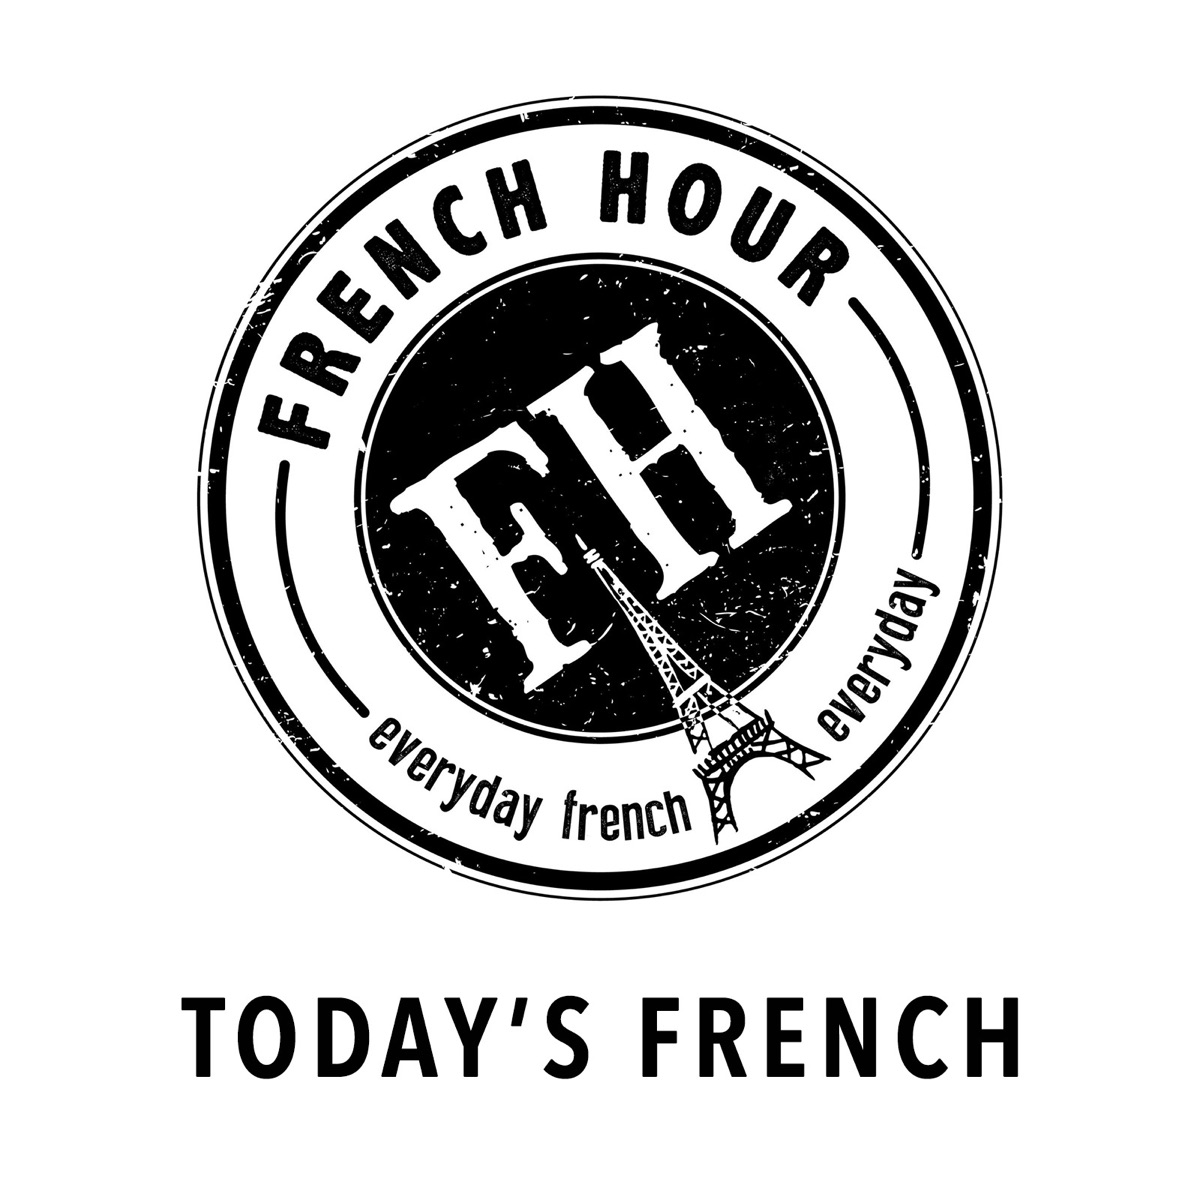 French hours